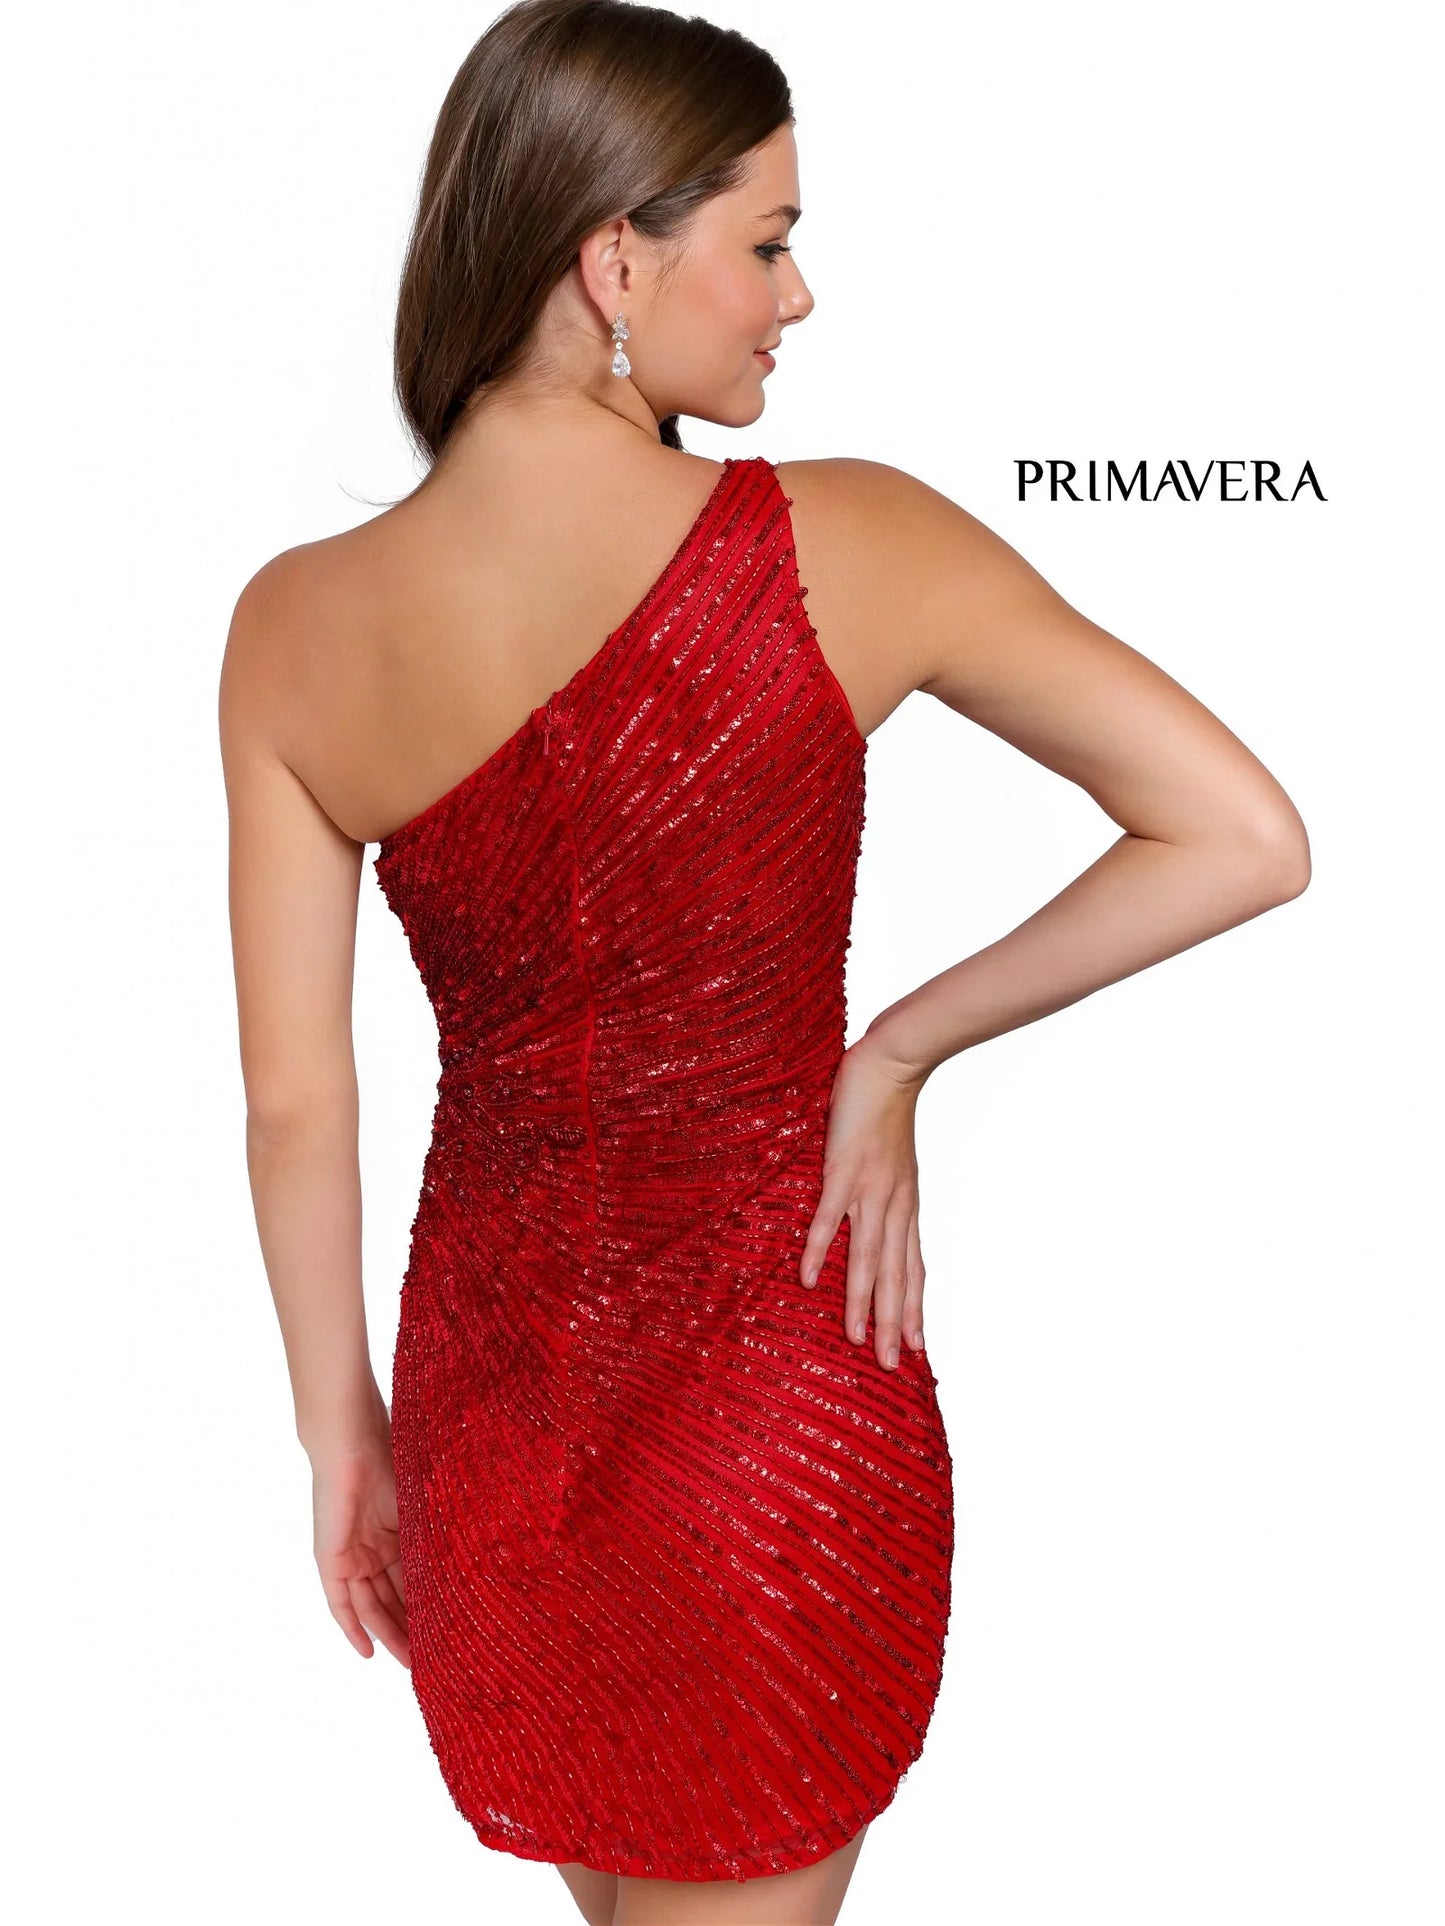 Primavera Couture 3830 Short 2023 Homecoming Dress Fitted Sequin Cocktail Dress  Available Colors- Fuchsia Midnight, Neon Coral, Red  Available Size-00-18